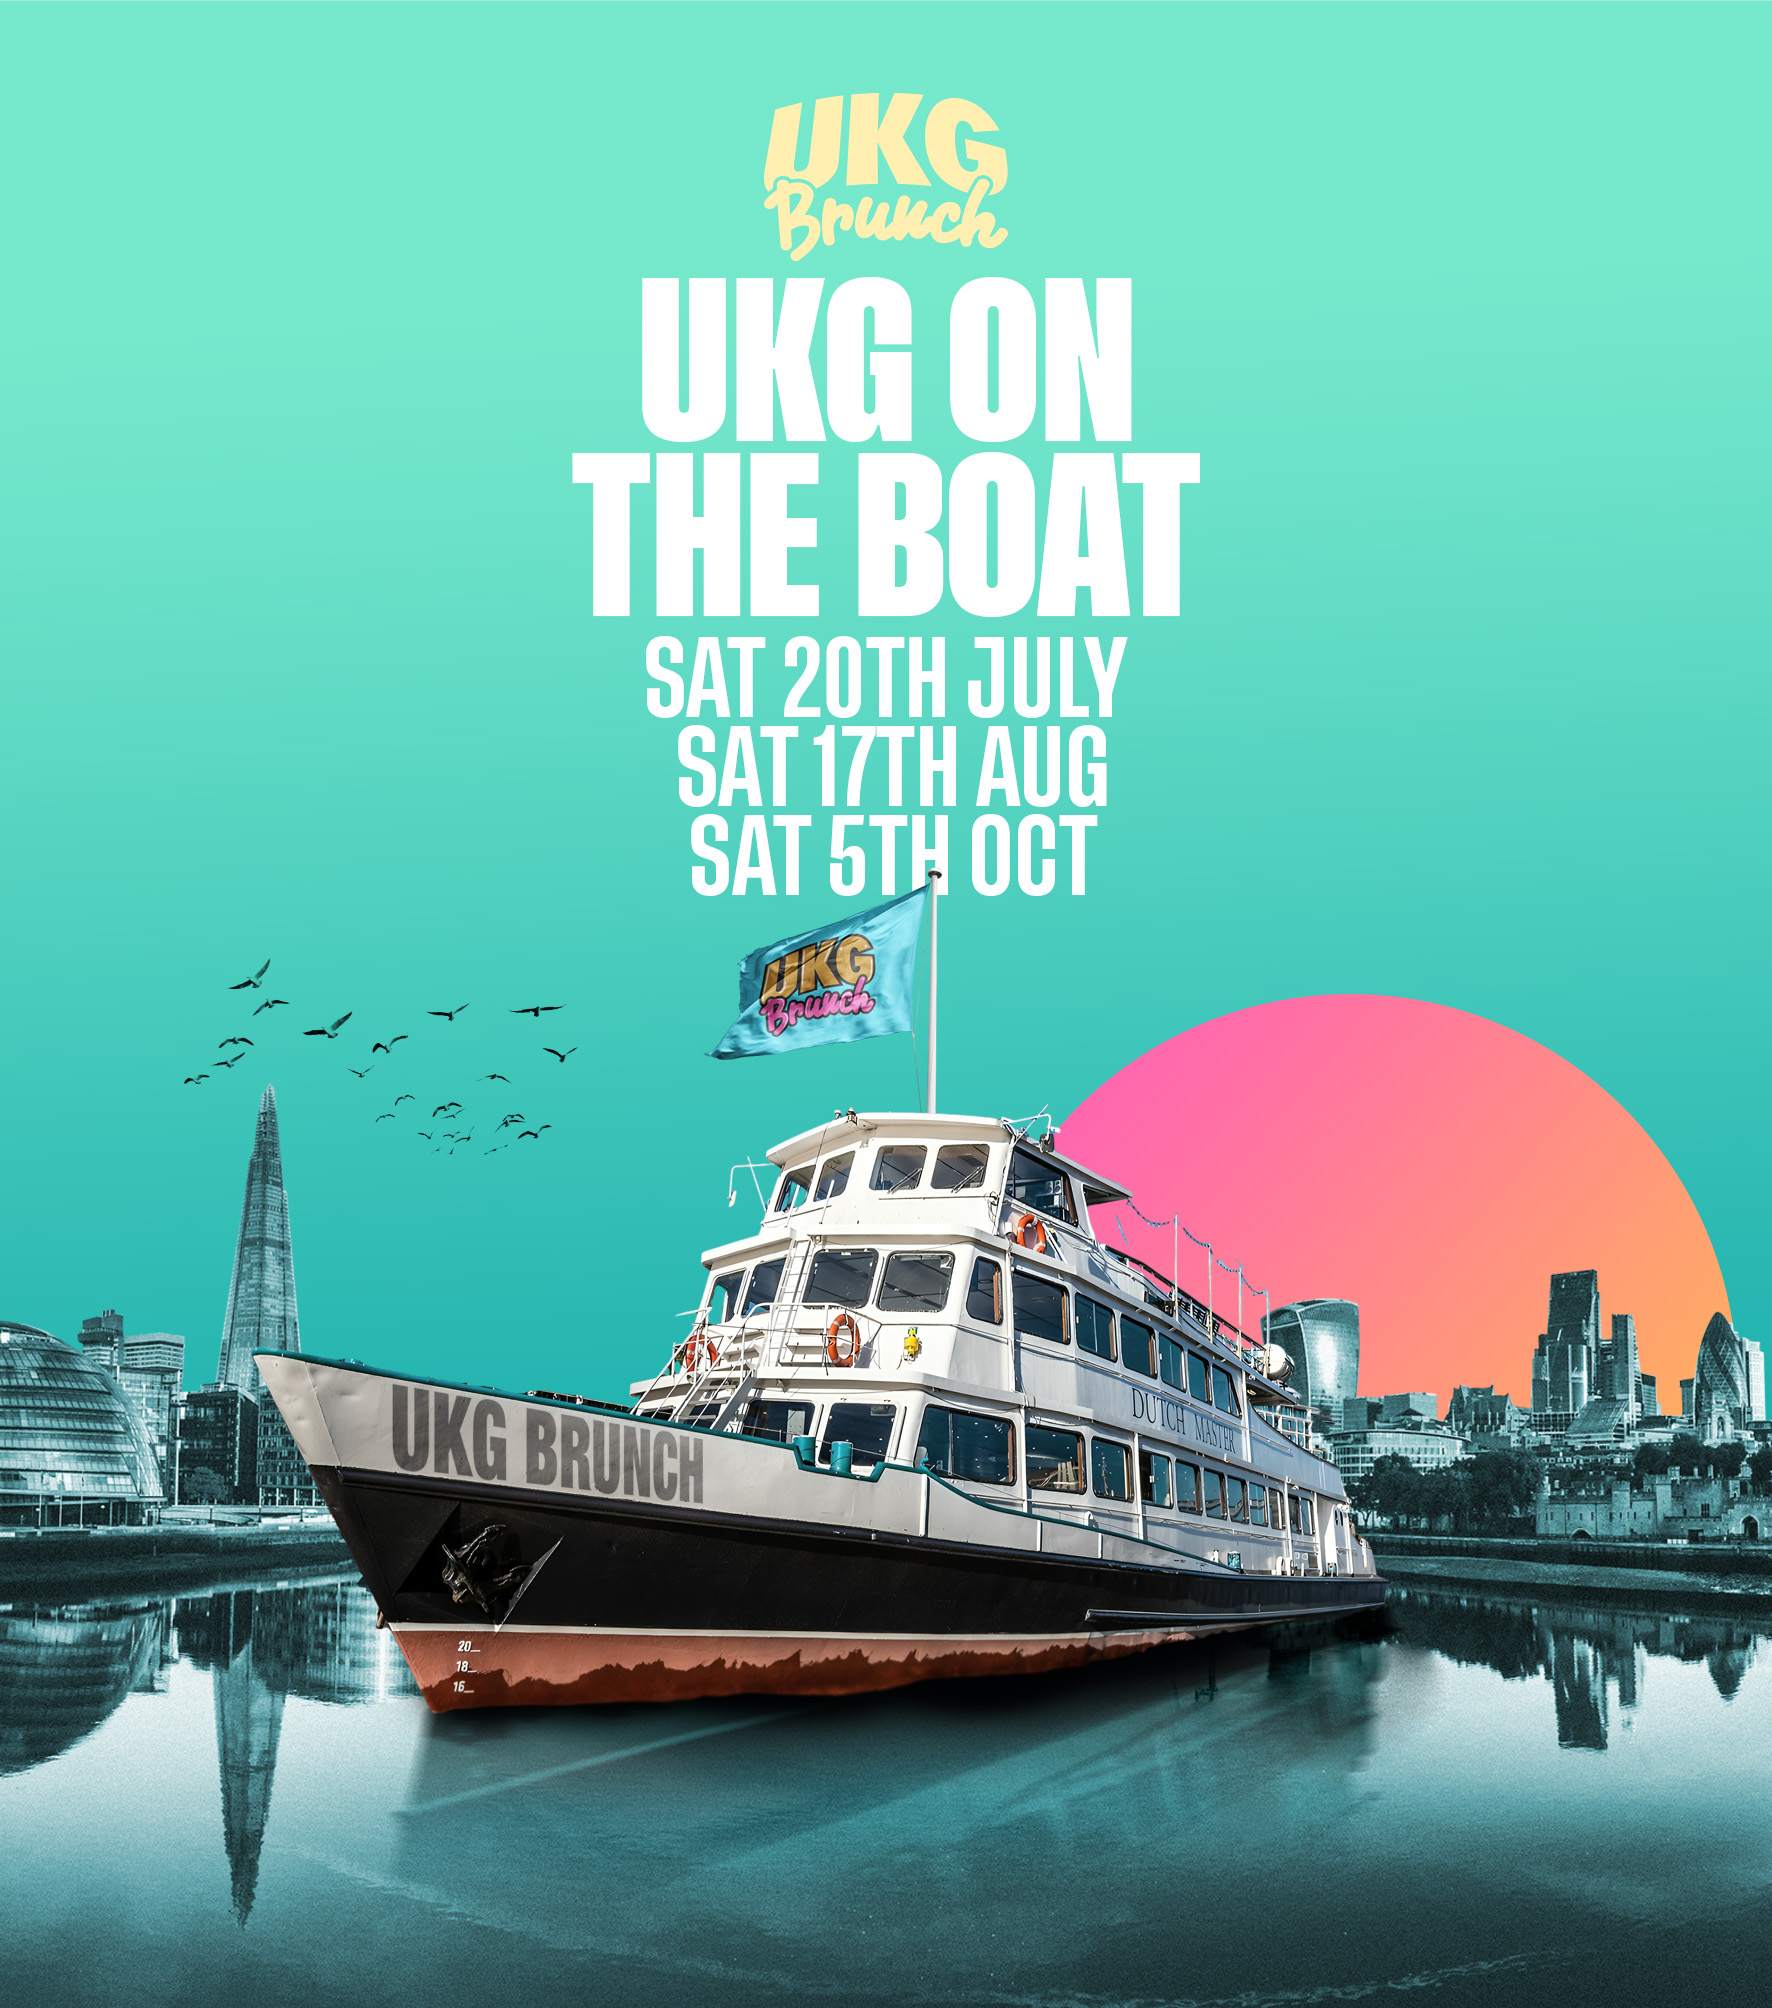 UKG ON THE BOAT (17TH AUGUST) - Página frontal